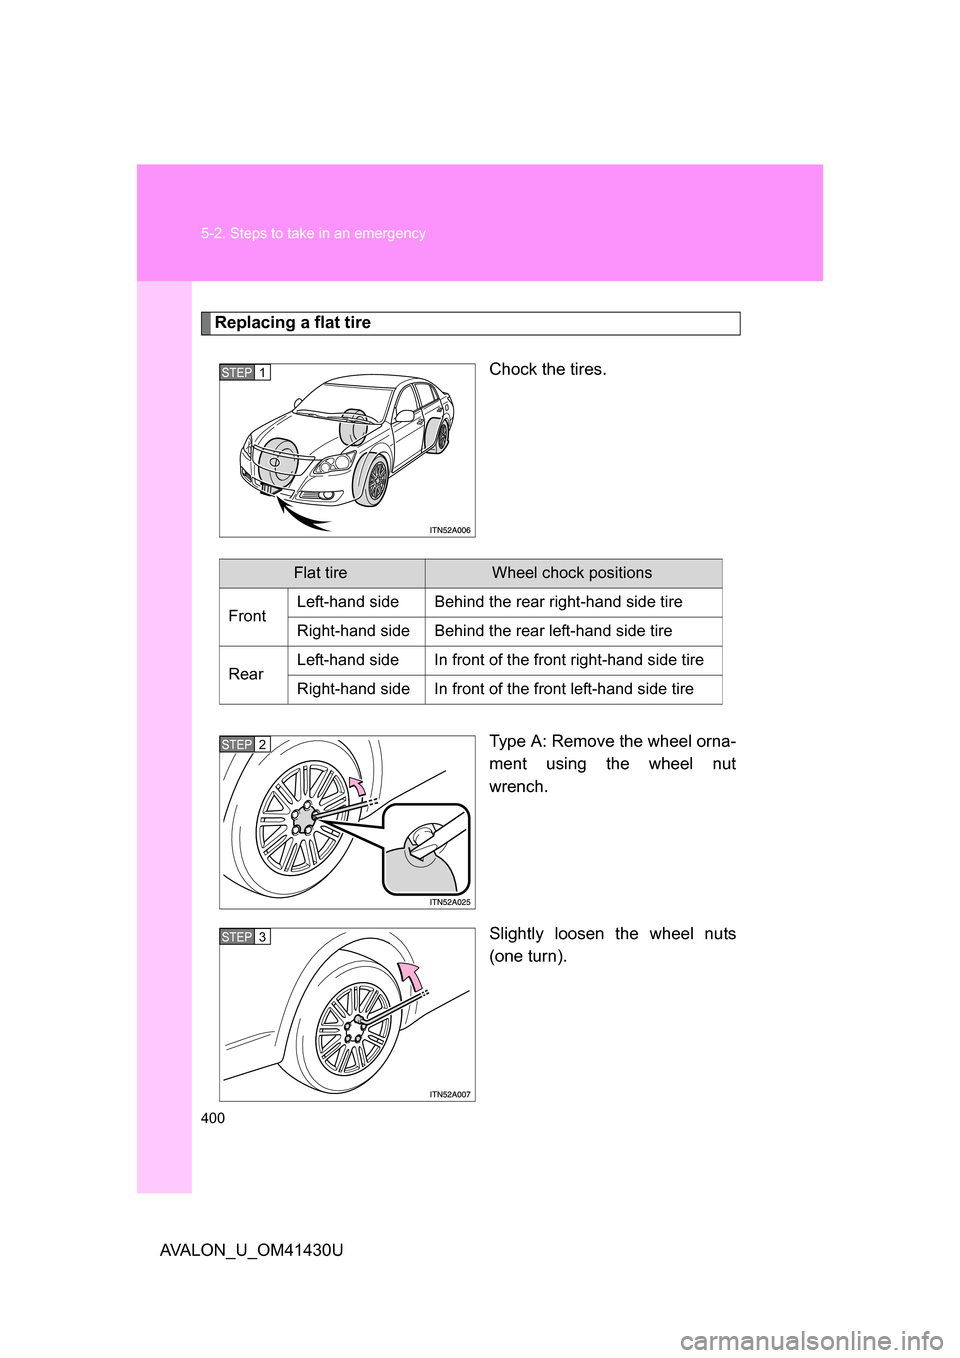 TOYOTA AVALON 2009 XX30 / 3.G Owners Manual 400 5-2. Steps to take in an emergency
AVALON_U_OM41430U
Replacing a flat tireChock the tires.
Type A: Remove the wheel orna-
ment using the wheel nut
wrench.
Slightly loosen the wheel nuts
(one turn)